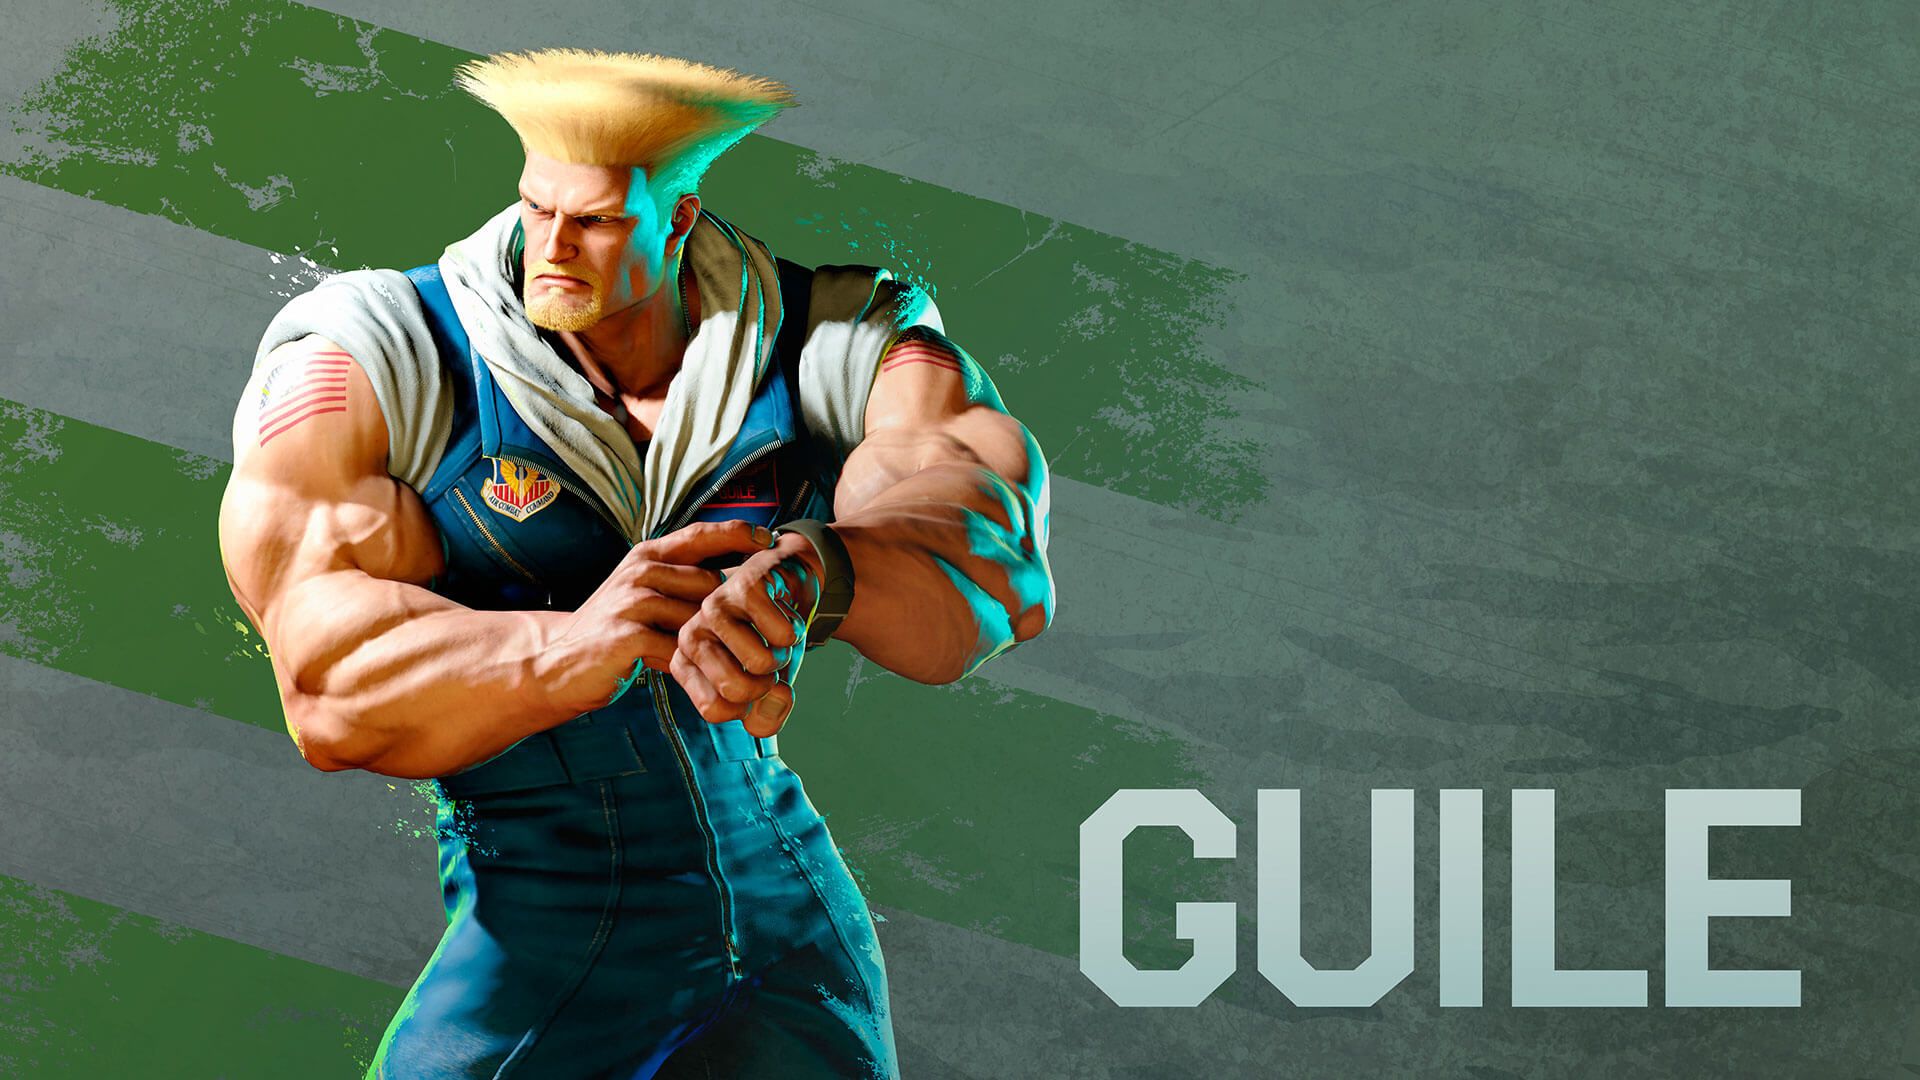 Guile's iconic sweep seen from the opponent's perspective in